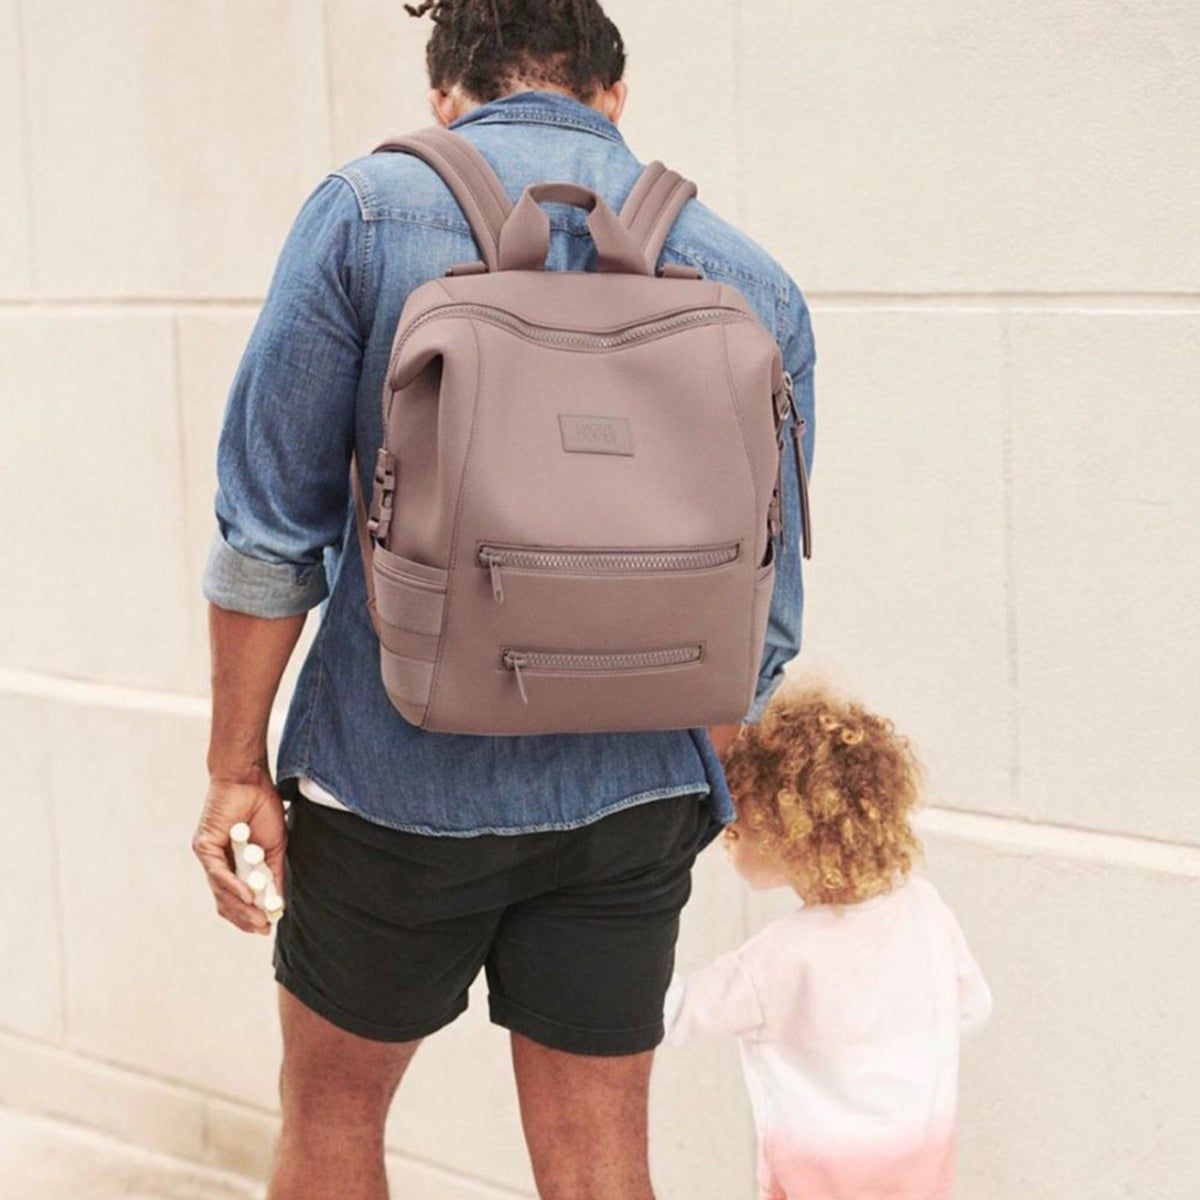 Dagne Dover Indi Diaper Backpack Comparison Large, Medium and